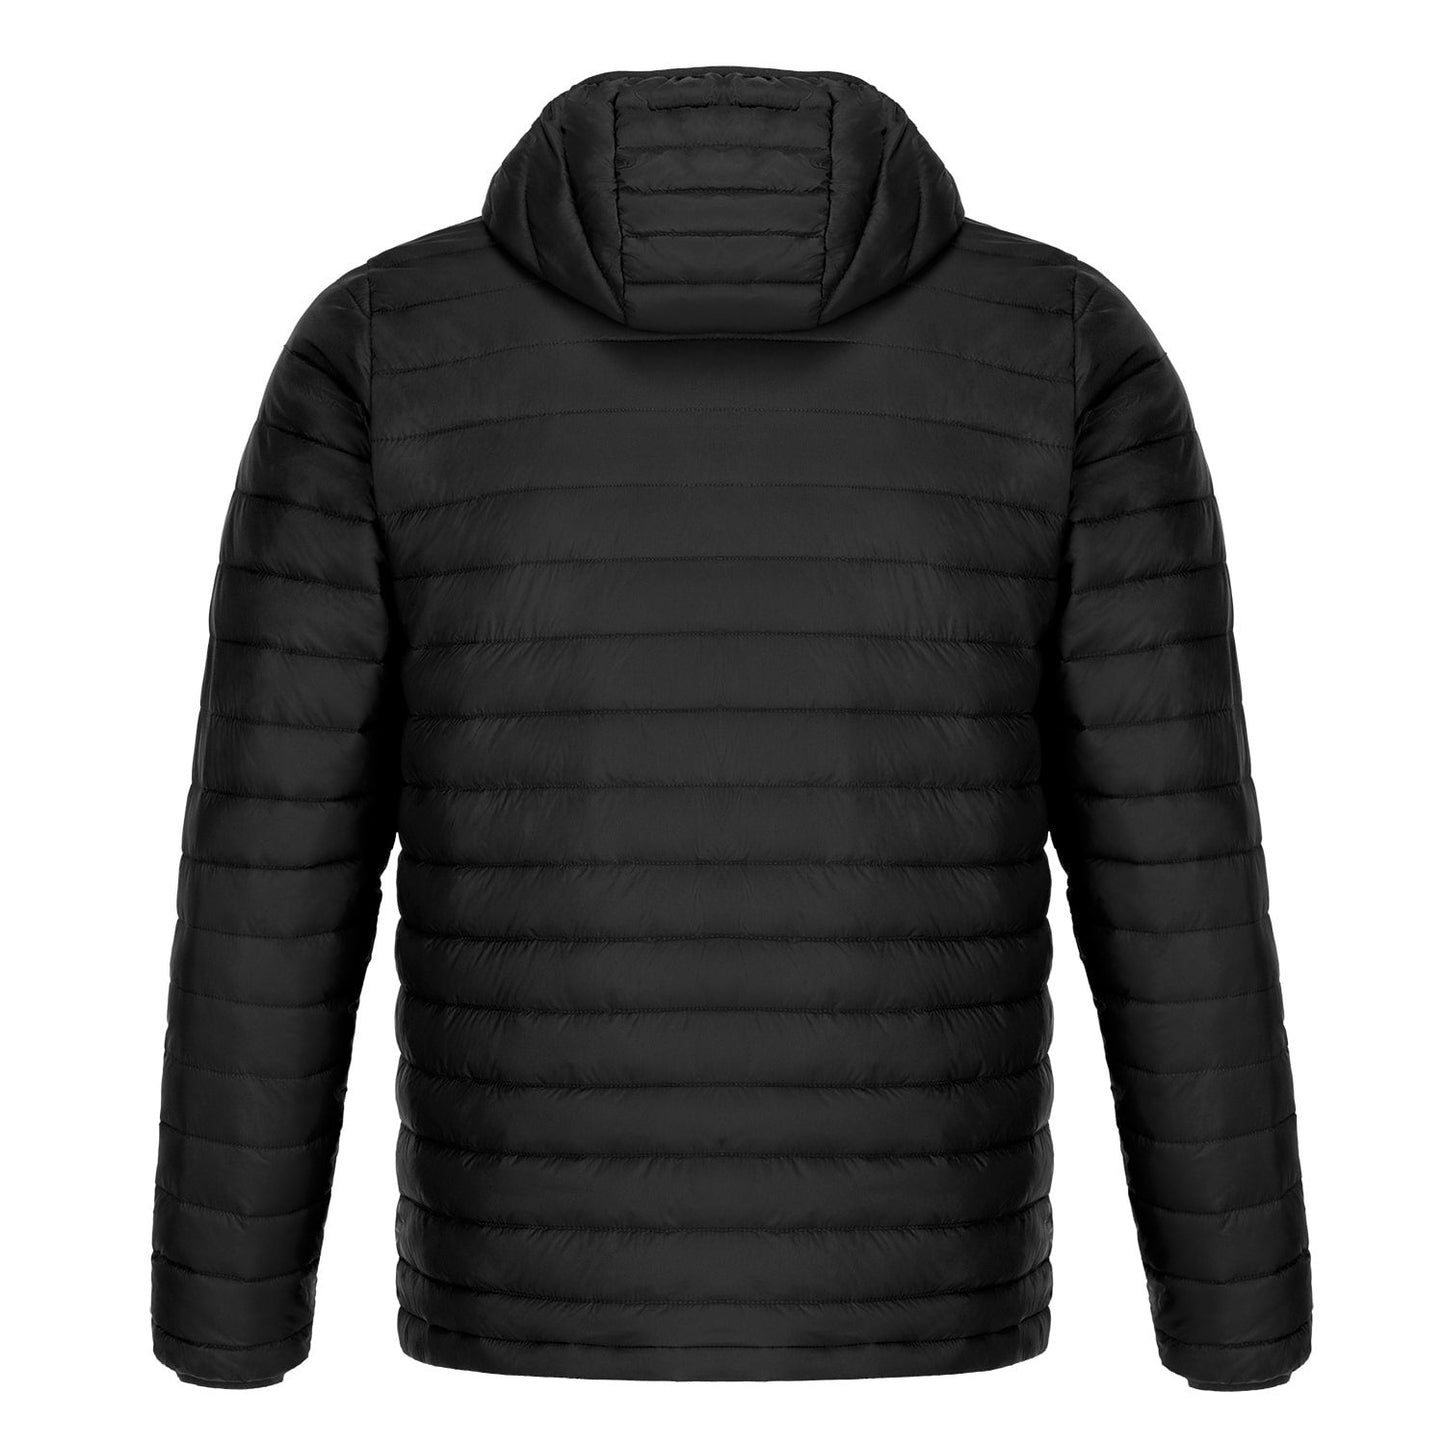 L0900Y - Canyon Youth Lightweight Puffy Jacket Puffer